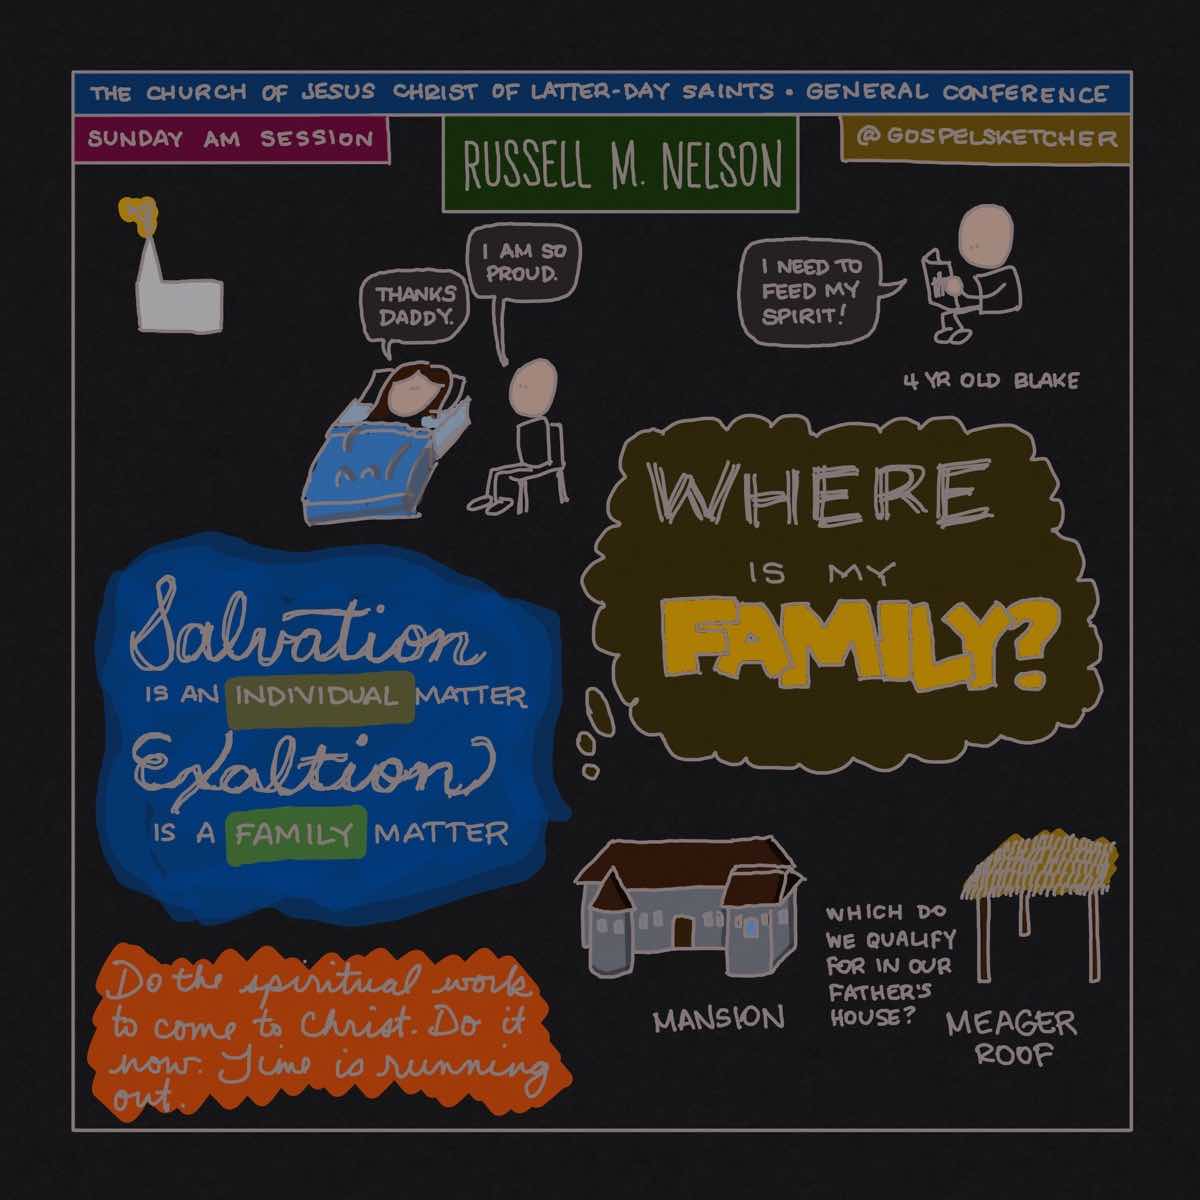 Russell M. Nelson sketchnotes